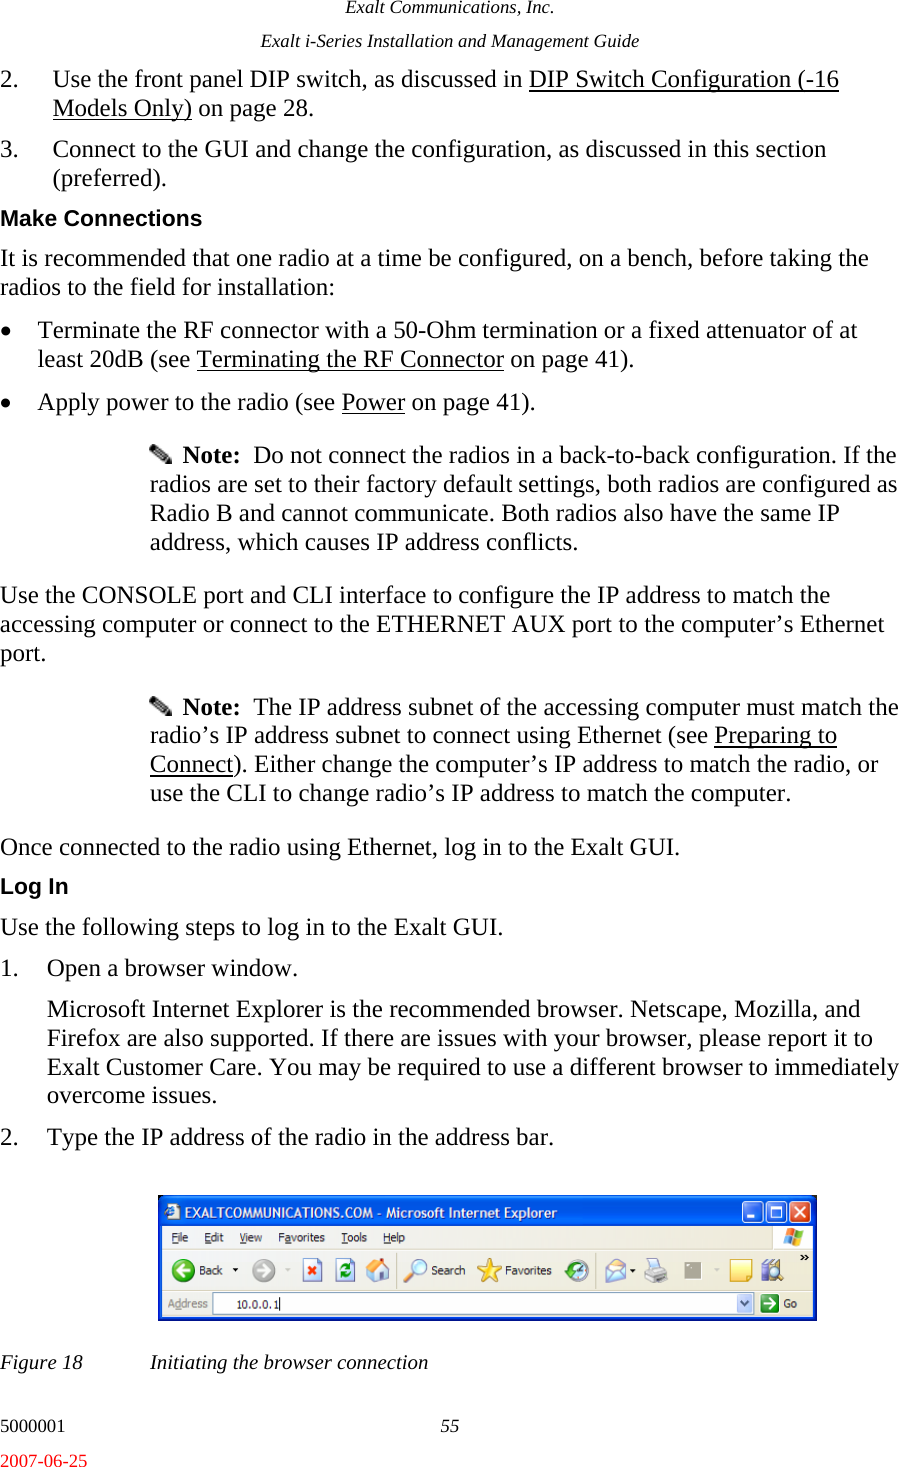 Exalt Communications, Inc. Exalt i-Series Installation and Management Guide 5000001  55 2007-06-25 2. Use the front panel DIP switch, as discussed in DIP Switch Configuration (-16 Models Only) on page 28. 3. Connect to the GUI and change the configuration, as discussed in this section (preferred). Make Connections It is recommended that one radio at a time be configured, on a bench, before taking the radios to the field for installation: • Terminate the RF connector with a 50-Ohm termination or a fixed attenuator of at least 20dB (see Terminating the RF Connector on page 41). • Apply power to the radio (see Power on page 41).   Note:  Do not connect the radios in a back-to-back configuration. If the radios are set to their factory default settings, both radios are configured as Radio B and cannot communicate. Both radios also have the same IP address, which causes IP address conflicts. Use the CONSOLE port and CLI interface to configure the IP address to match the accessing computer or connect to the ETHERNET AUX port to the computer’s Ethernet port.   Note:  The IP address subnet of the accessing computer must match the radio’s IP address subnet to connect using Ethernet (see Preparing to Connect). Either change the computer’s IP address to match the radio, or use the CLI to change radio’s IP address to match the computer. Once connected to the radio using Ethernet, log in to the Exalt GUI. Log In Use the following steps to log in to the Exalt GUI. 1. Open a browser window.  Microsoft Internet Explorer is the recommended browser. Netscape, Mozilla, and Firefox are also supported. If there are issues with your browser, please report it to Exalt Customer Care. You may be required to use a different browser to immediately overcome issues. 2. Type the IP address of the radio in the address bar. Figure 18  Initiating the browser connection 